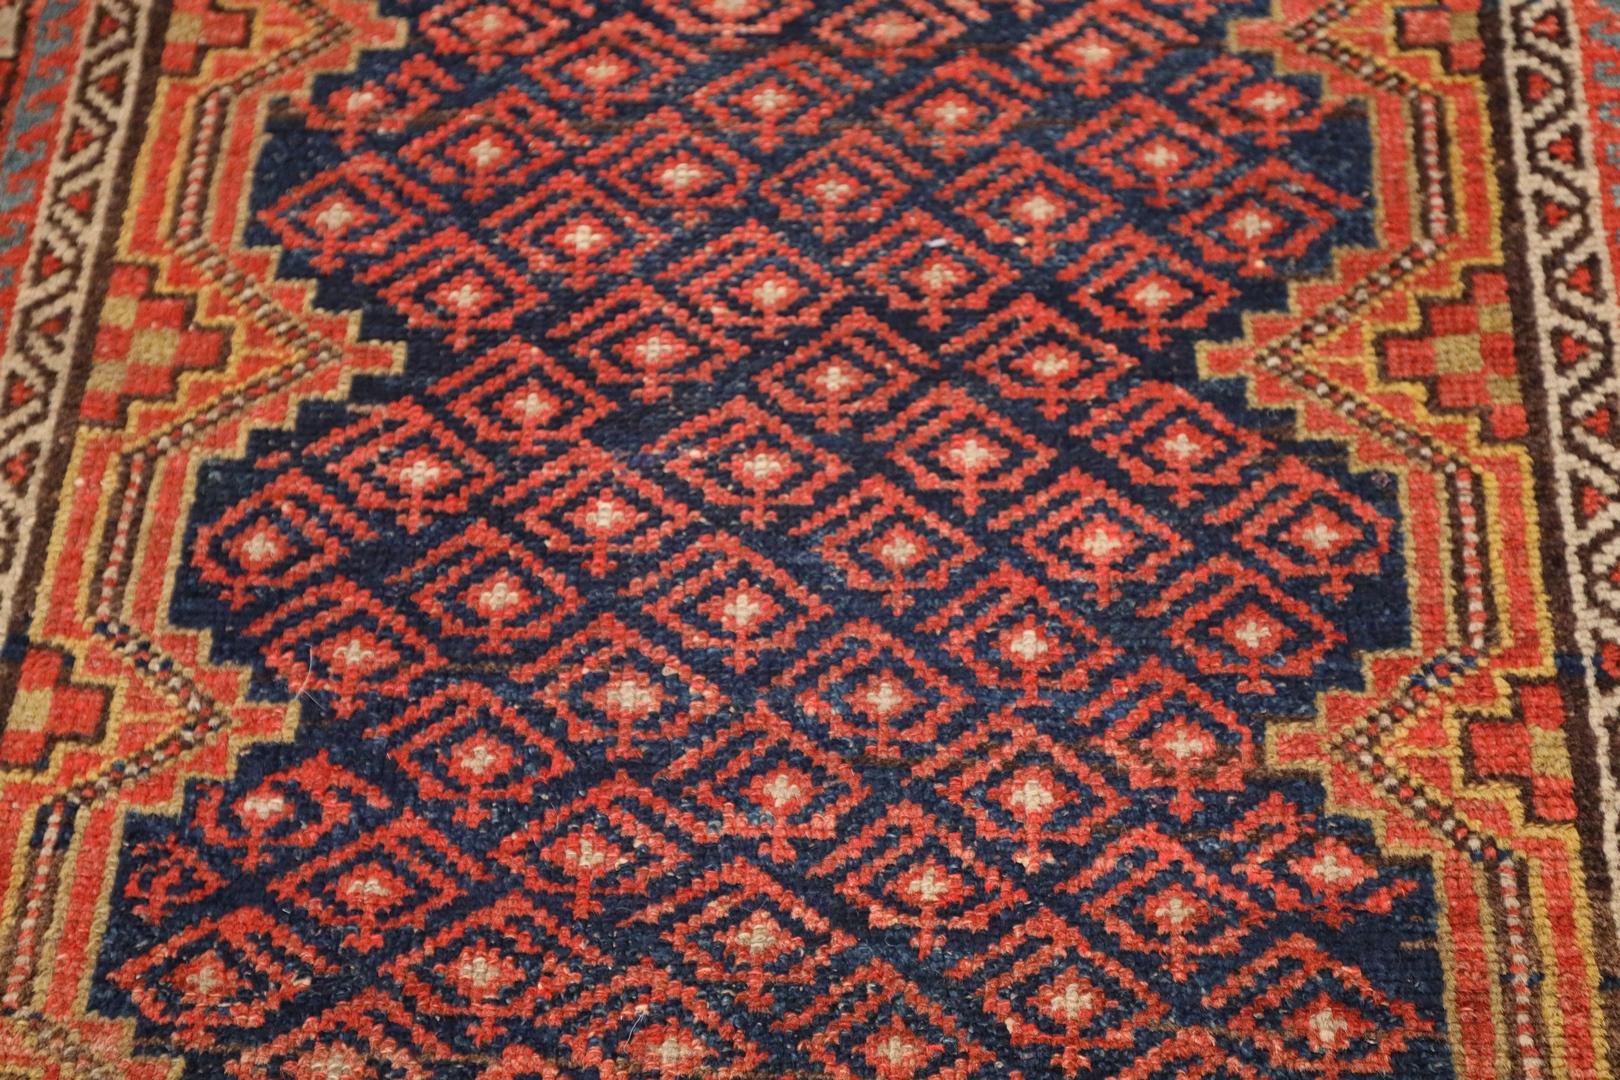 20th Century Malayer Antique Rug, Red Navy - 3' x 6'6